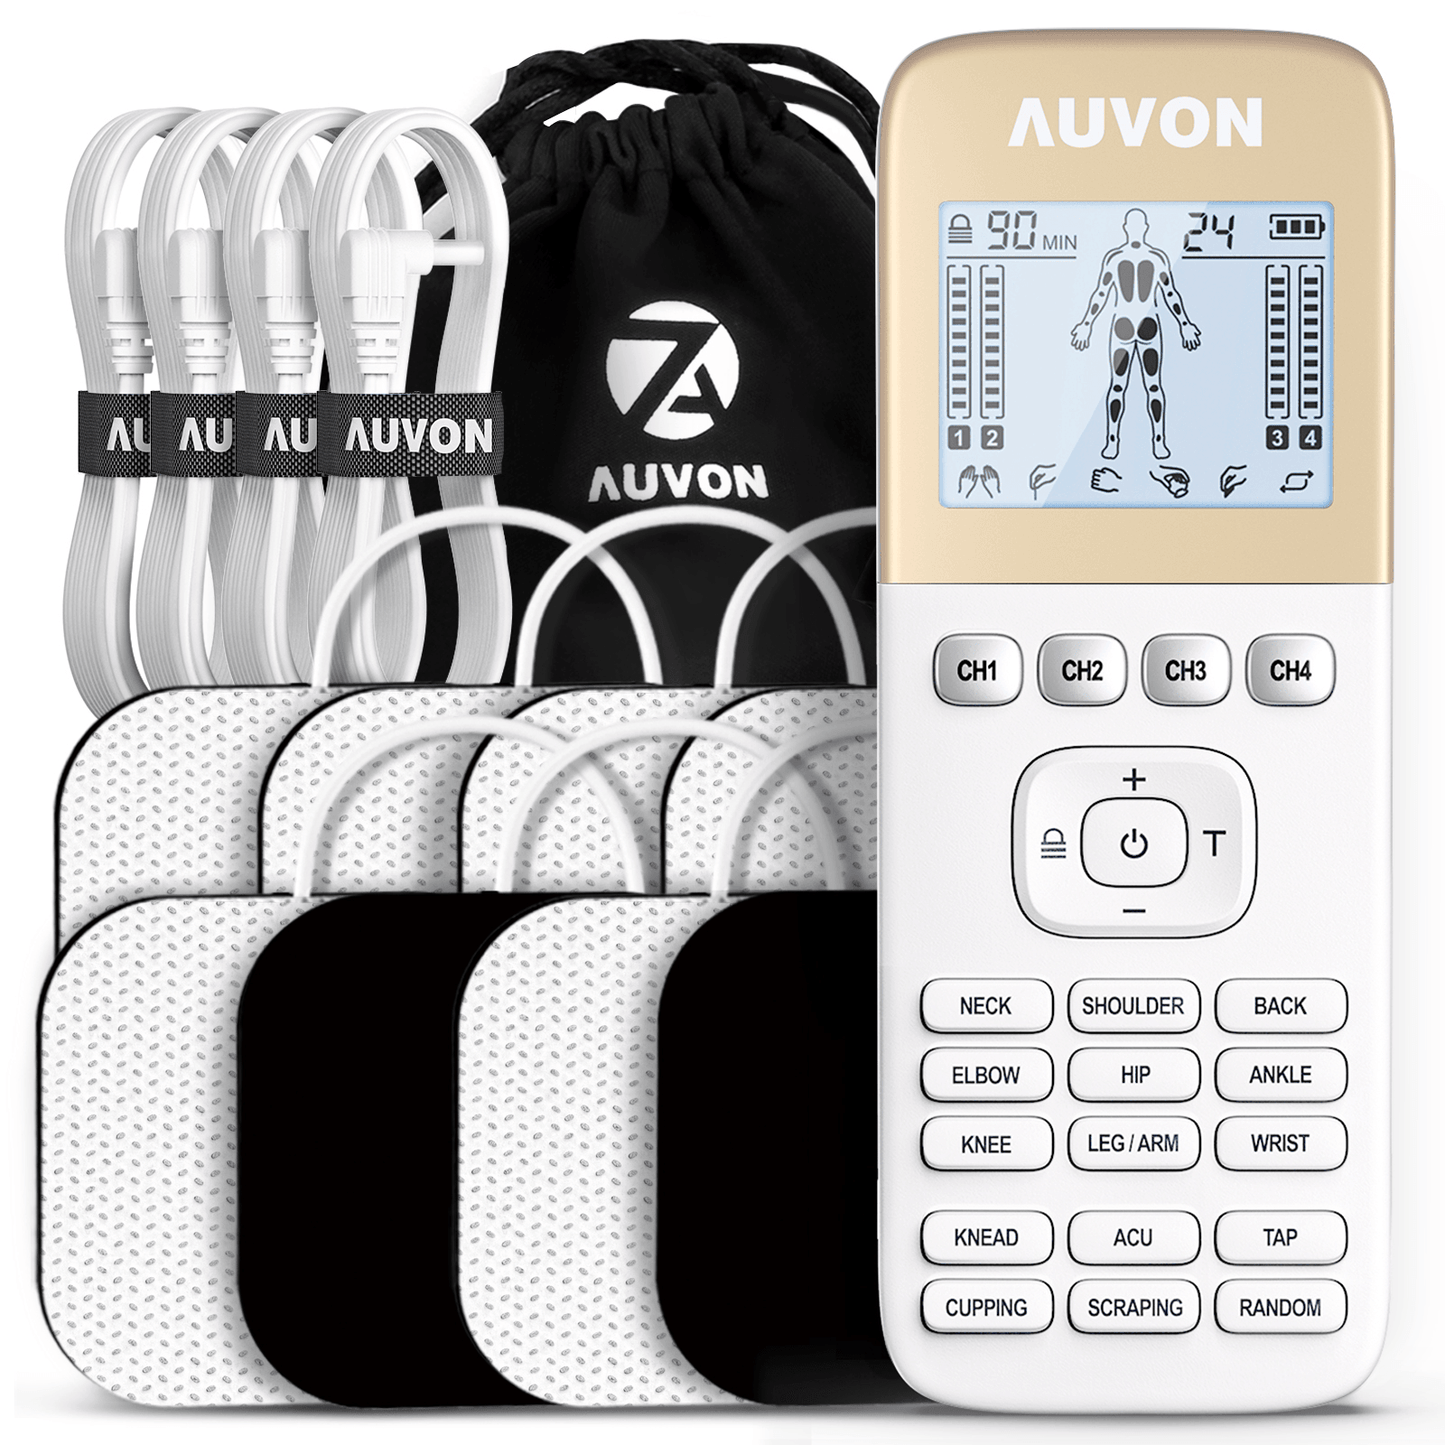 https://auvonhealth.com/cdn/shop/files/auvon-4-outputs-h1-tens-unit-24-modes-muscle-stimulator-for-pain-relief-rechargeable-tens-ems-machine-with-easy-to-select-button-design-2x-battery-life-dust-proof-bag-and-8-electrode_274d6301-4a84-4269-9146-12518456119f.png?v=1686019700&width=1445